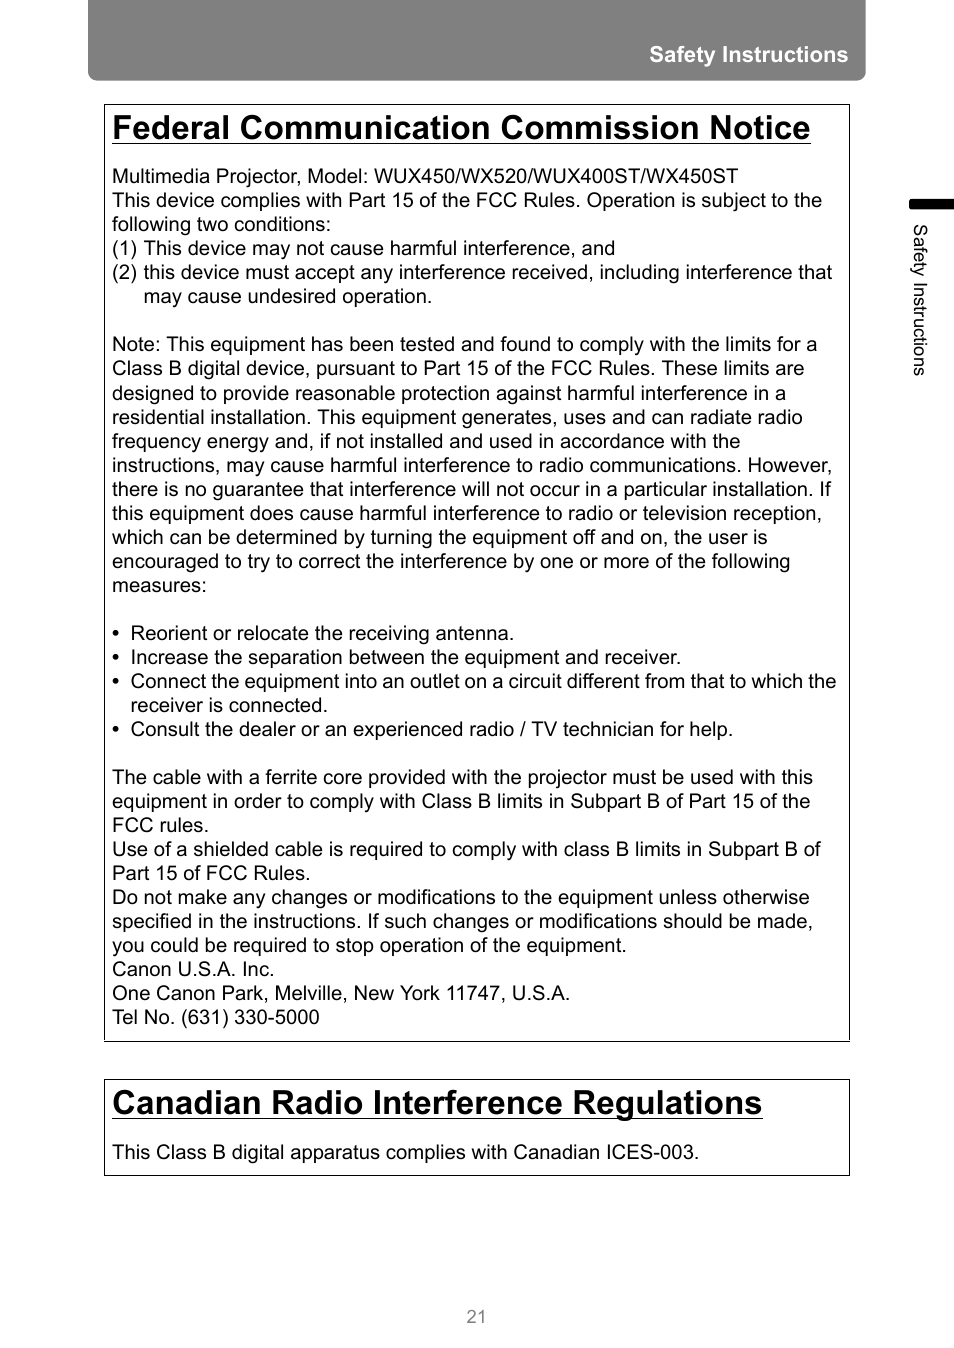 Federal communication commission notice, Canadian radio interference regulations | Canon XEED WUX450 User Manual | Page 21 / 314